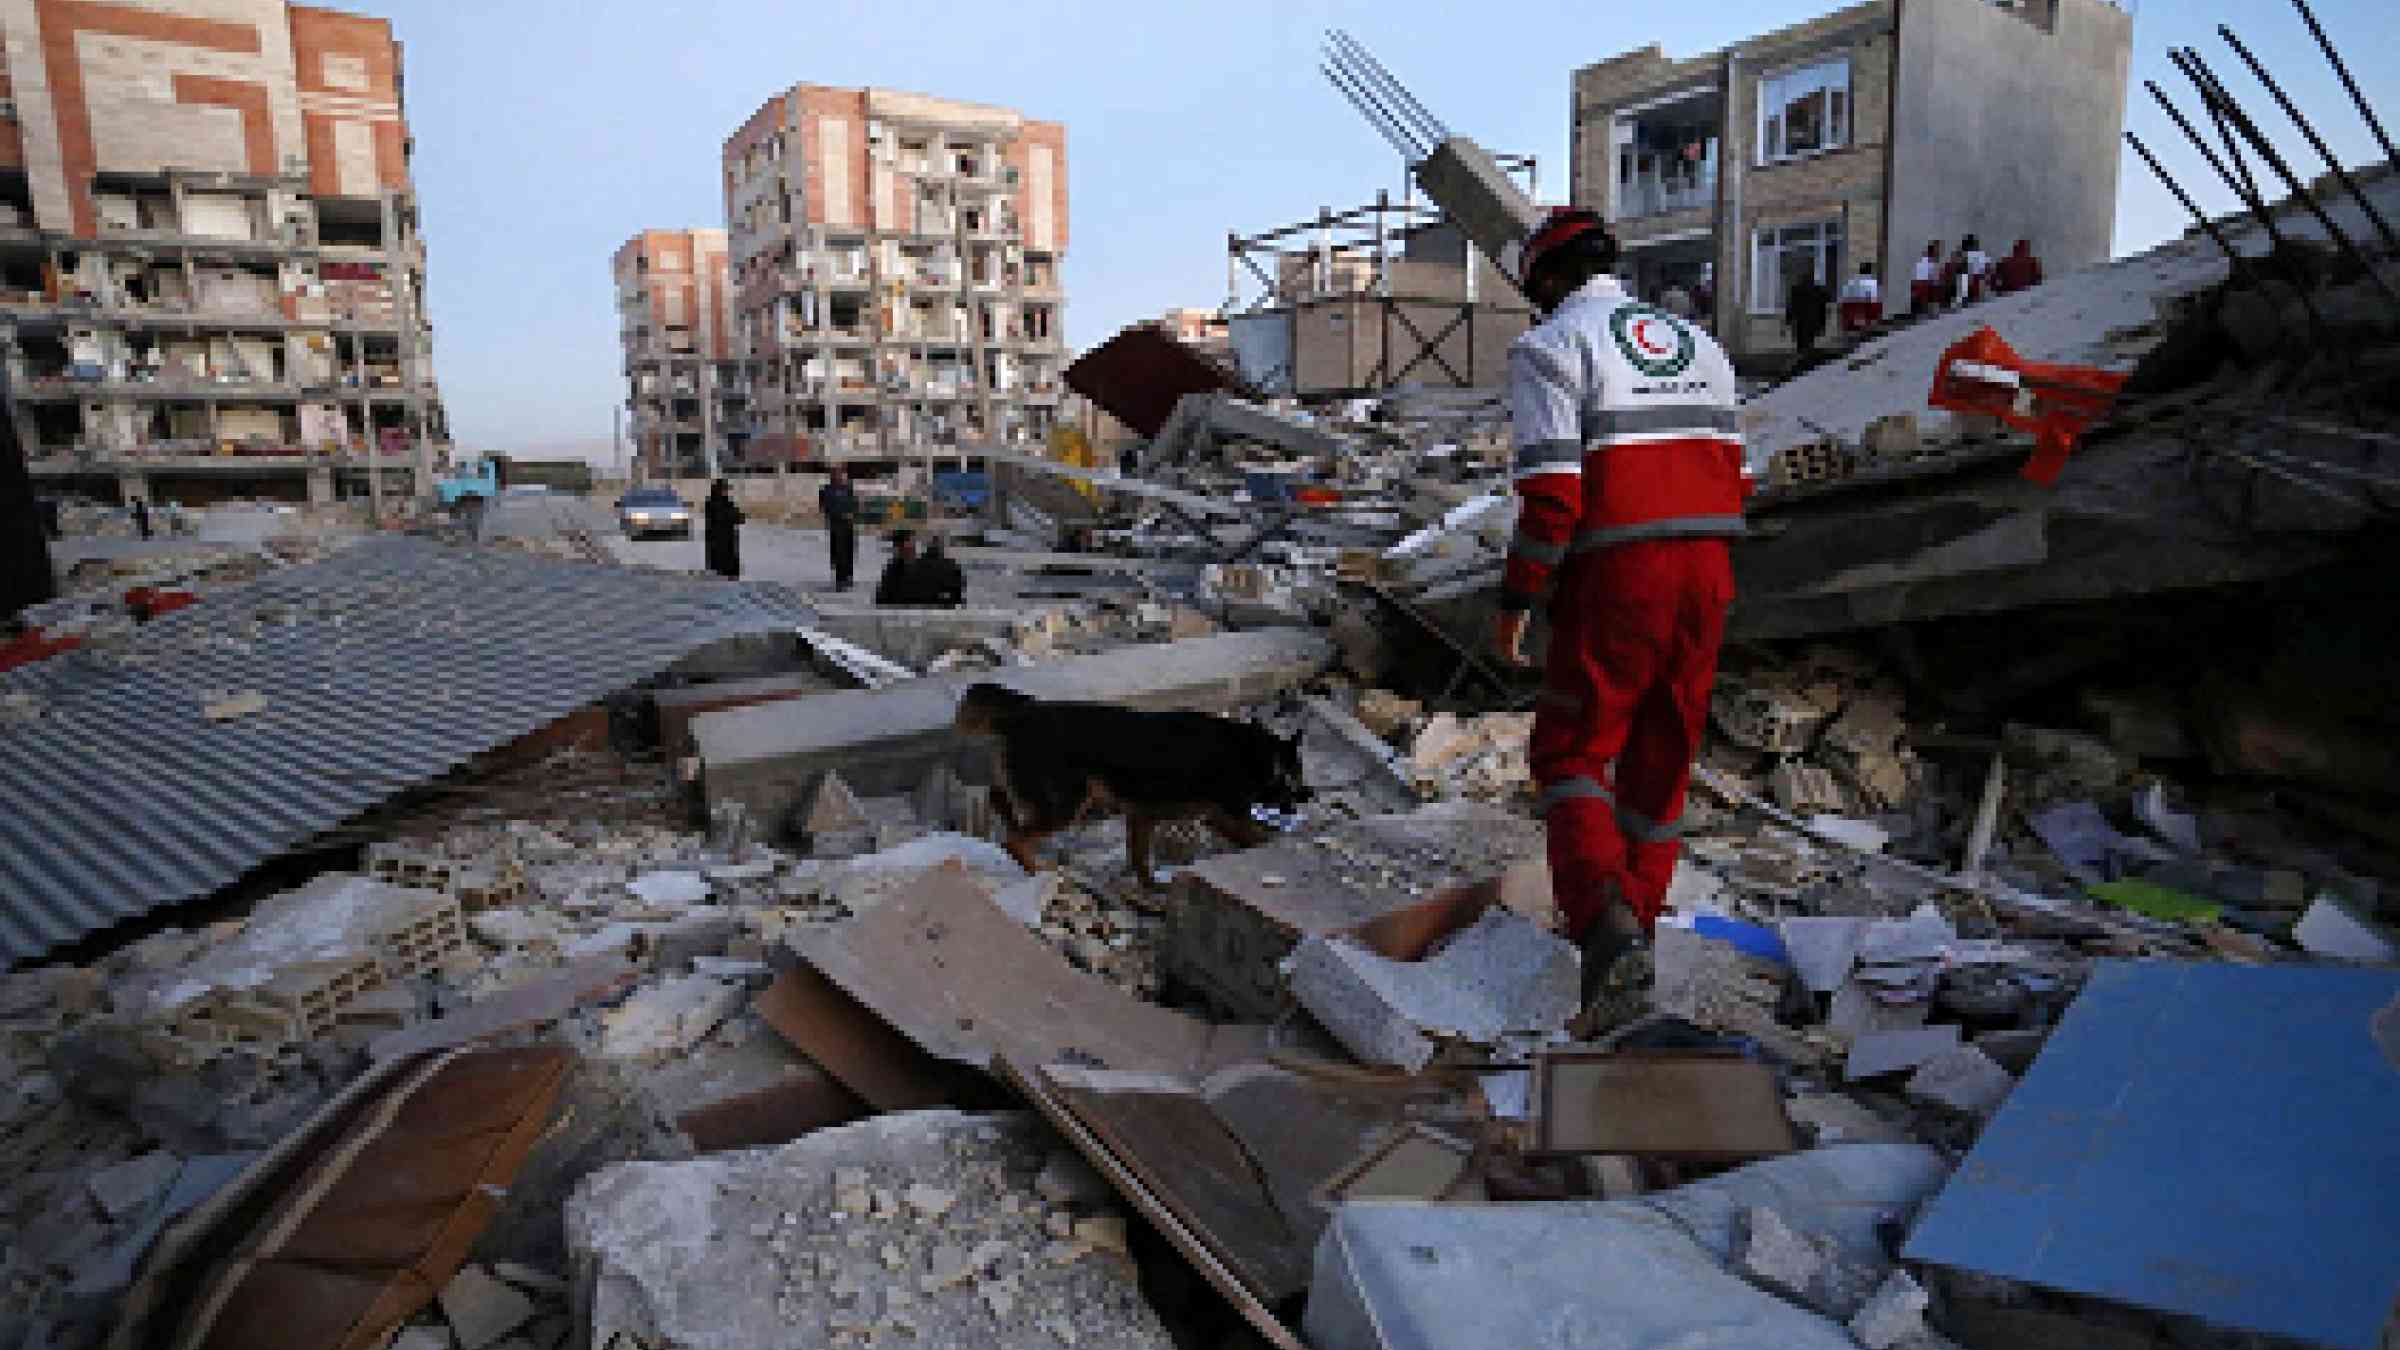 Damage to buildings in recent earthquake in Iran (photo: Times Free Press)